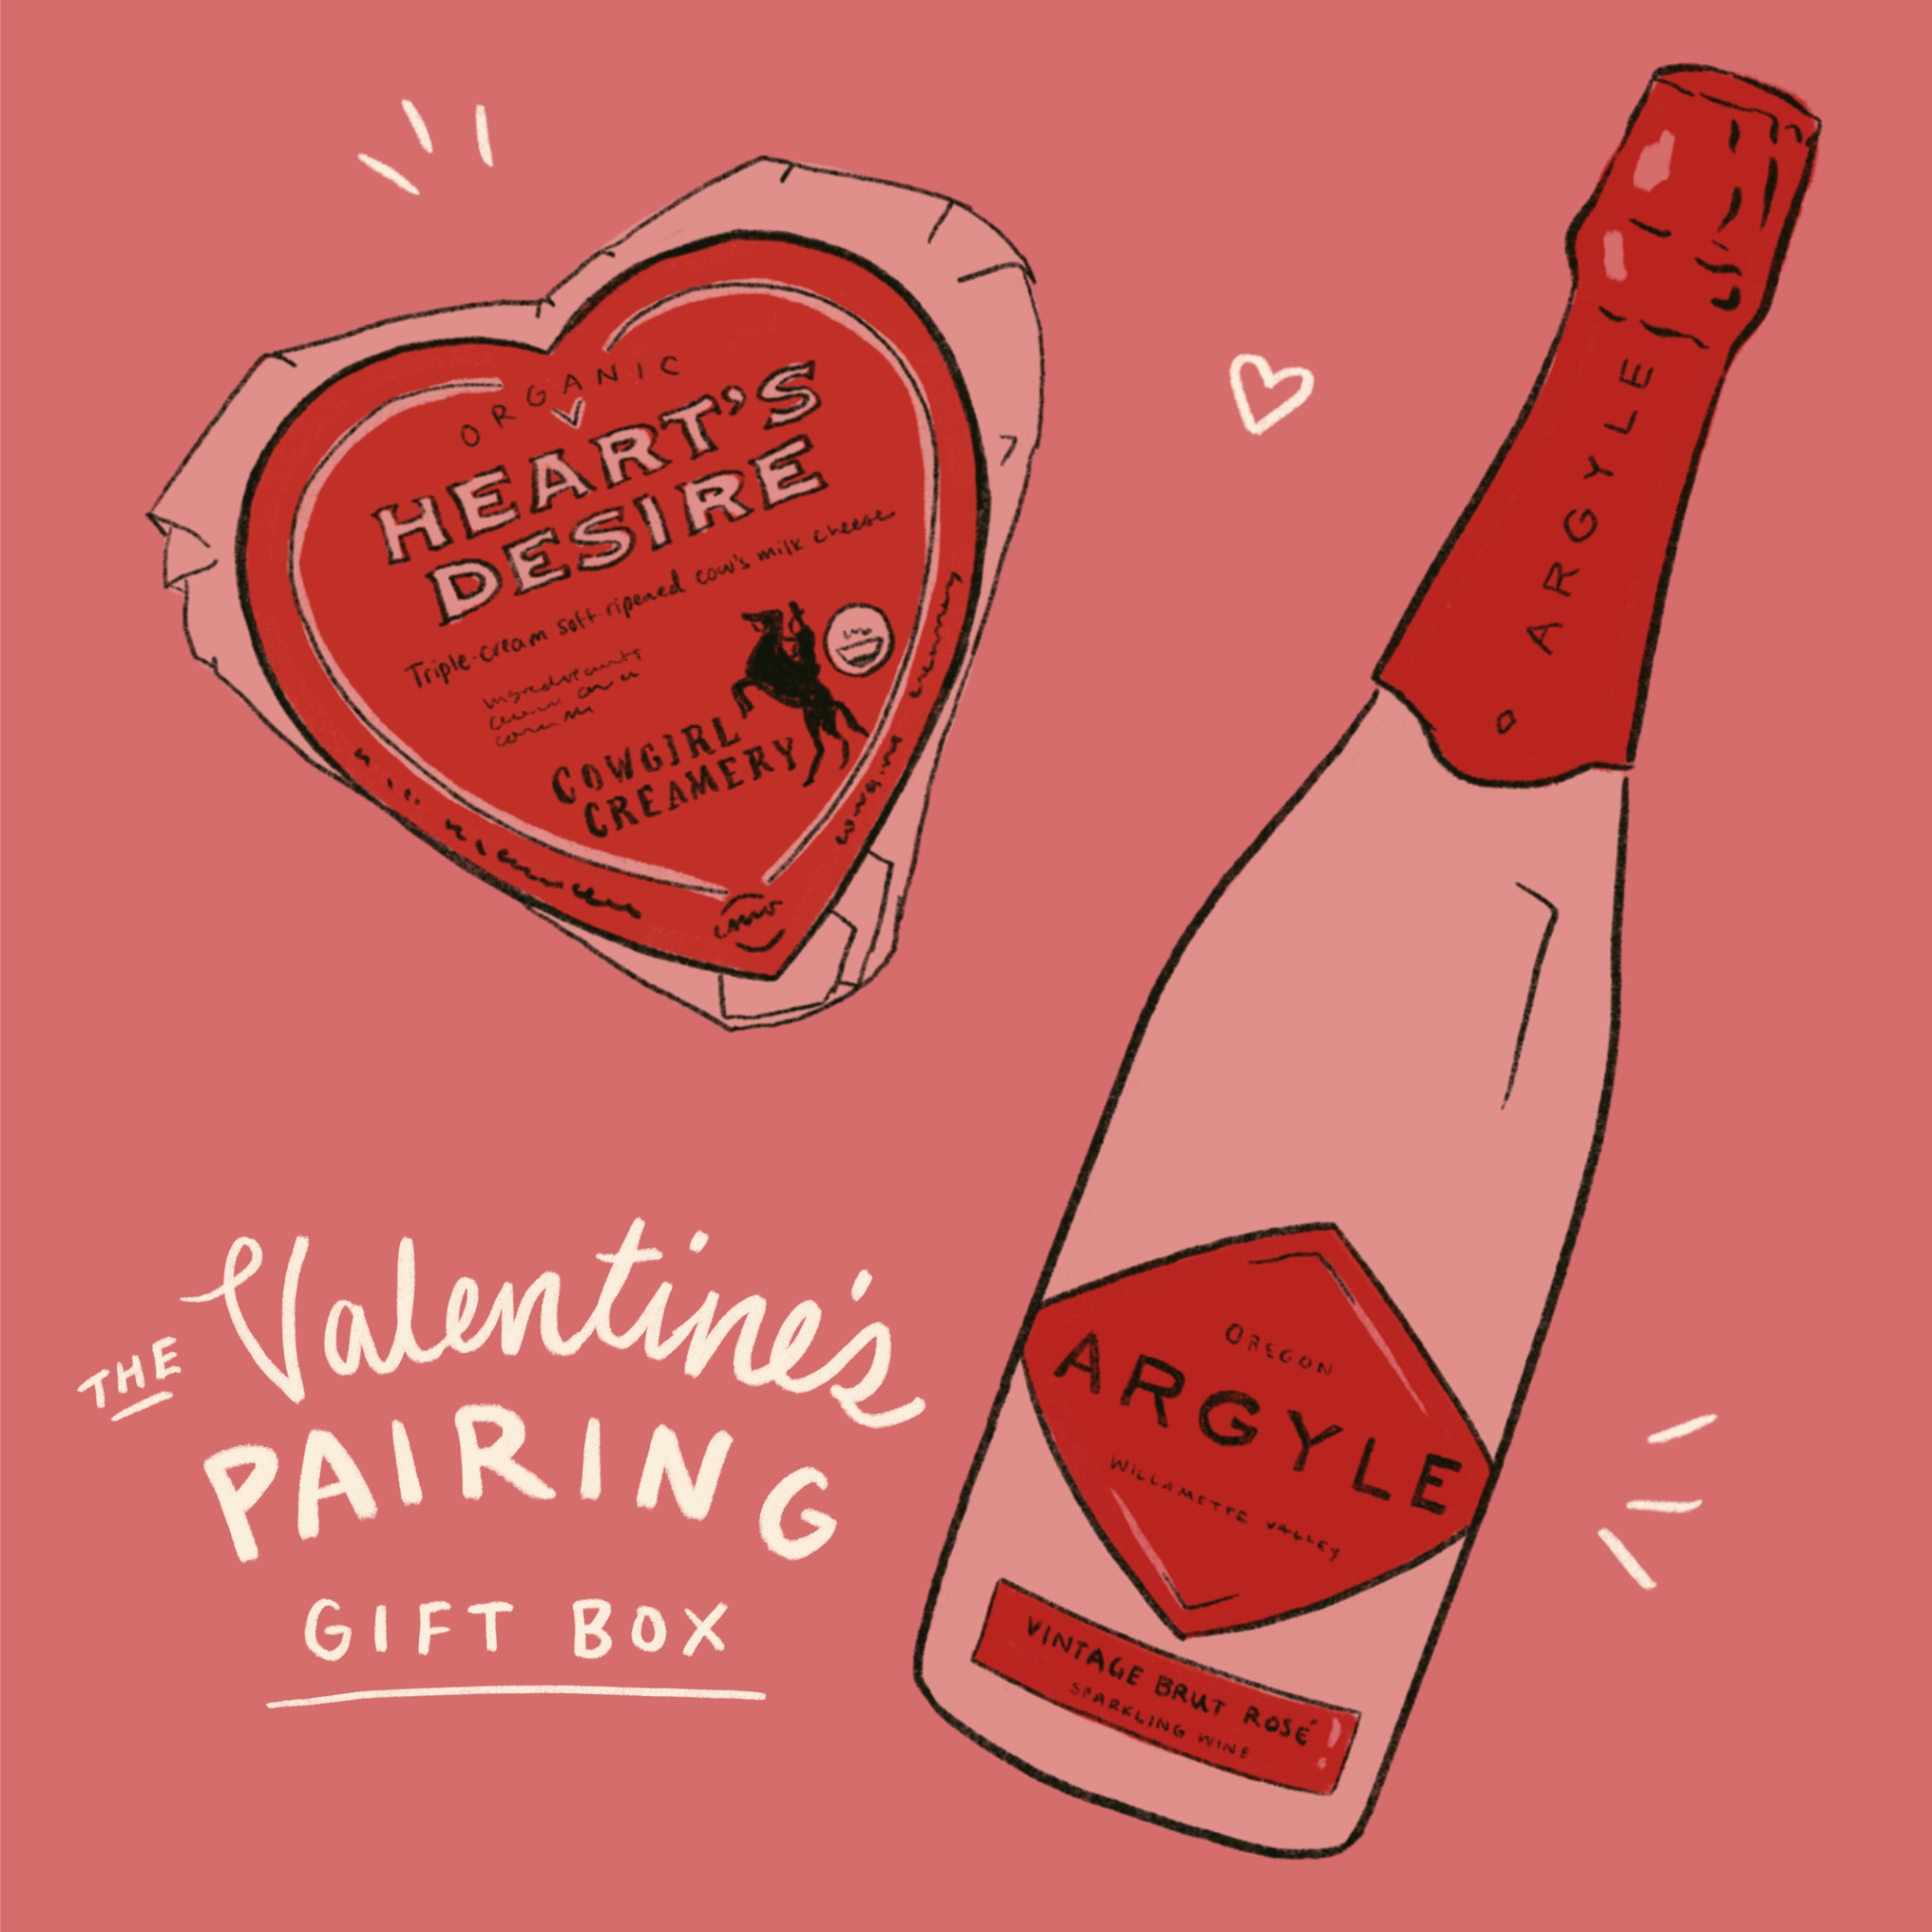 Graphic with a heart shaped cheese and bottle of sparkling wine that says "The Valentine's Pairing Gift Box"